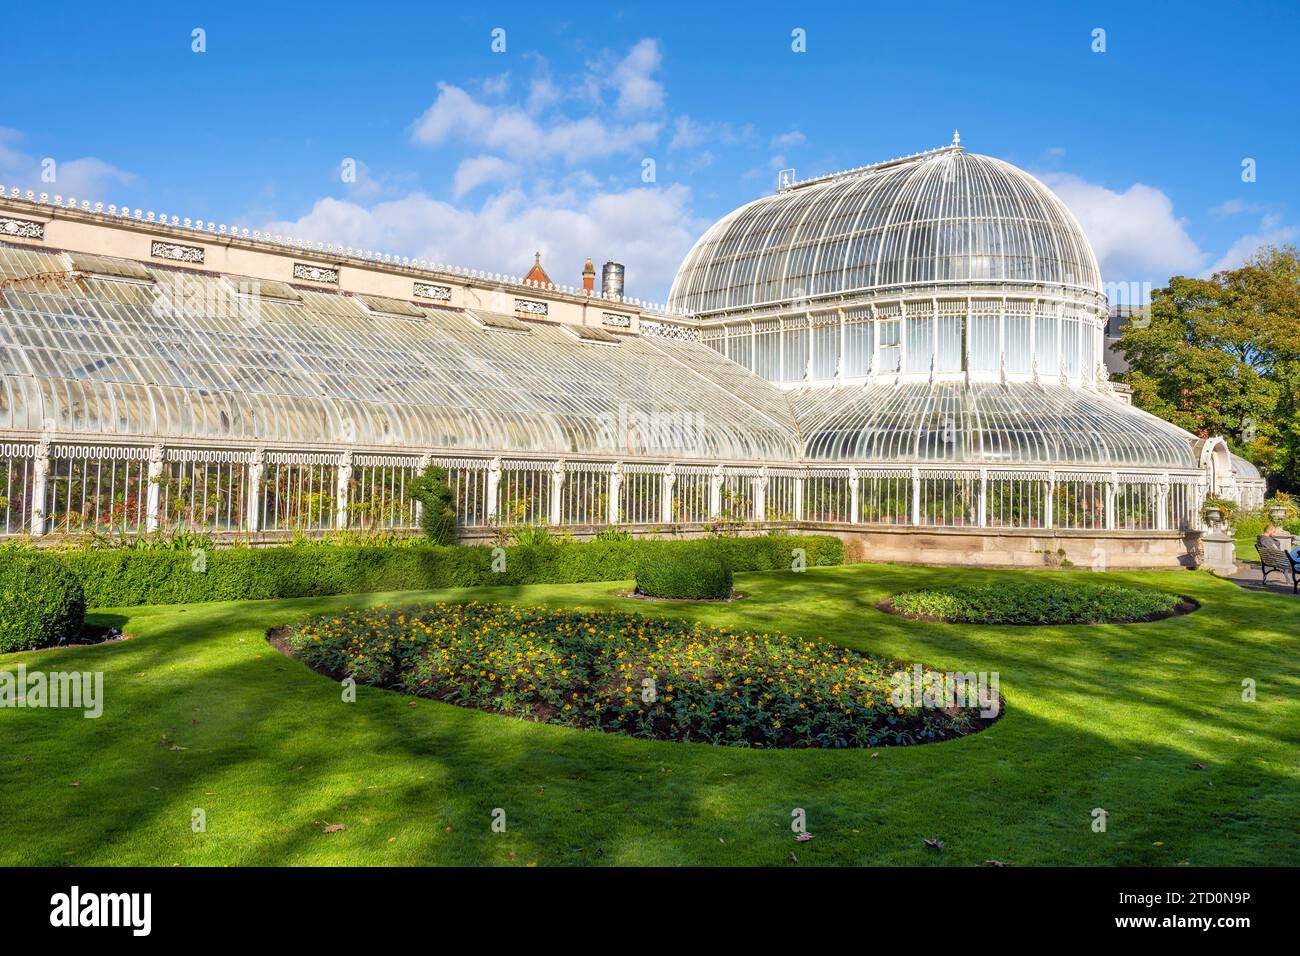 Exterior view of Palm House, a cast iron glasshouse designed in the 19th century by Charles Lanyon, in the Botanic Gardens near Ulster Museum, Belfast Stock Photo